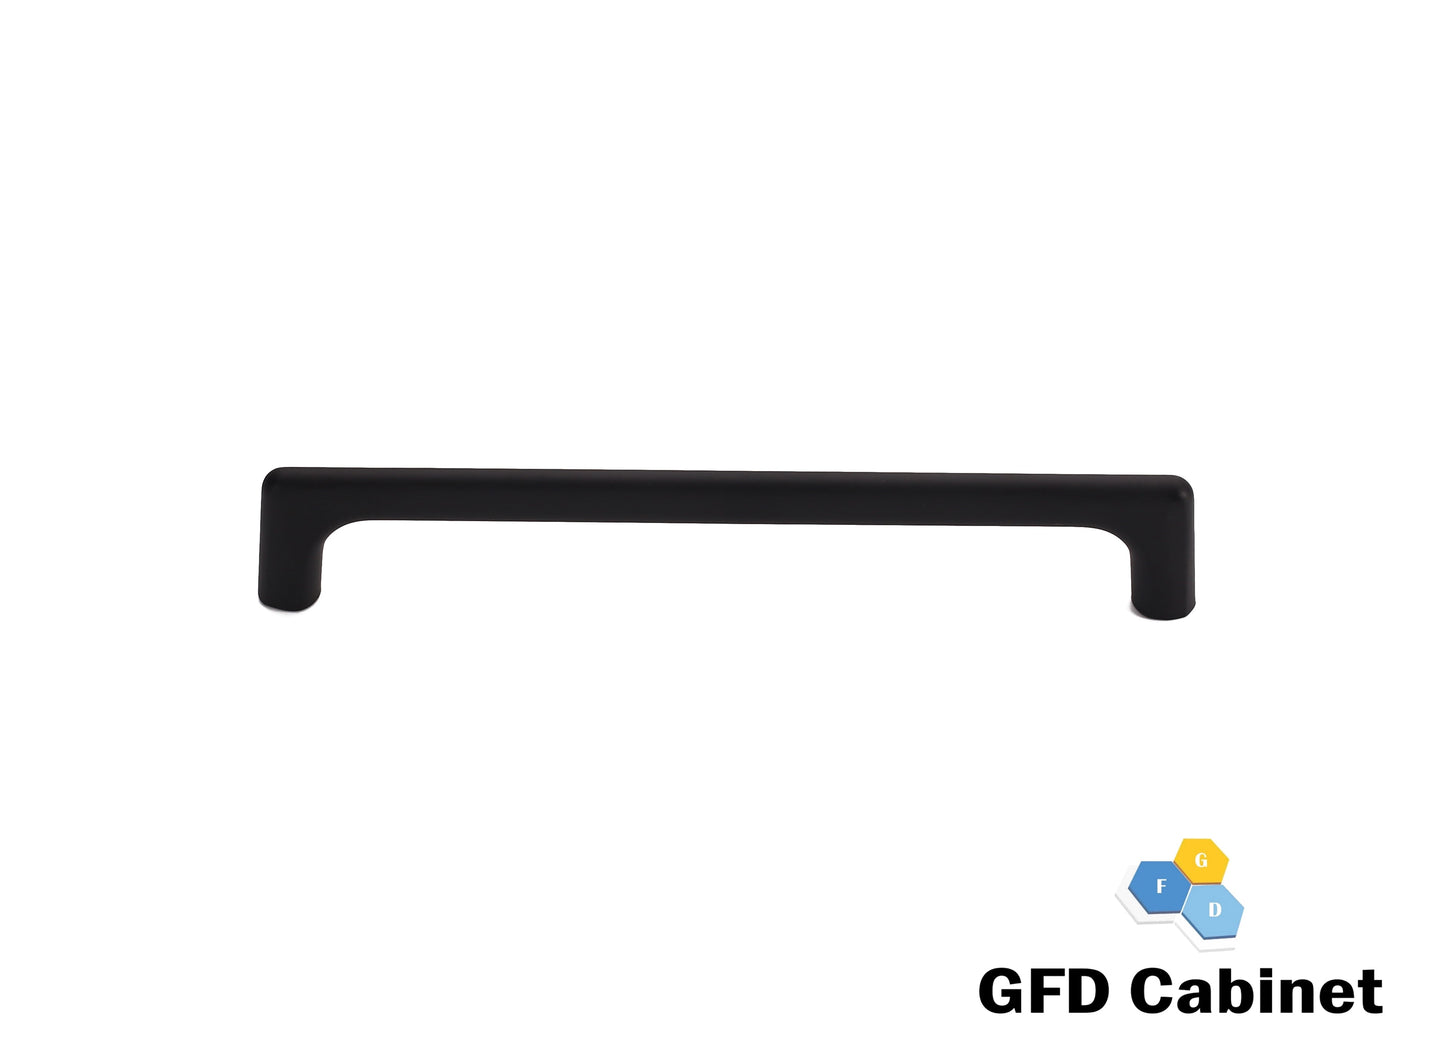 H-3307-160 6-5/16 in. (160 mm) Center-to-Center Cabinet Thin Square Pull Handle